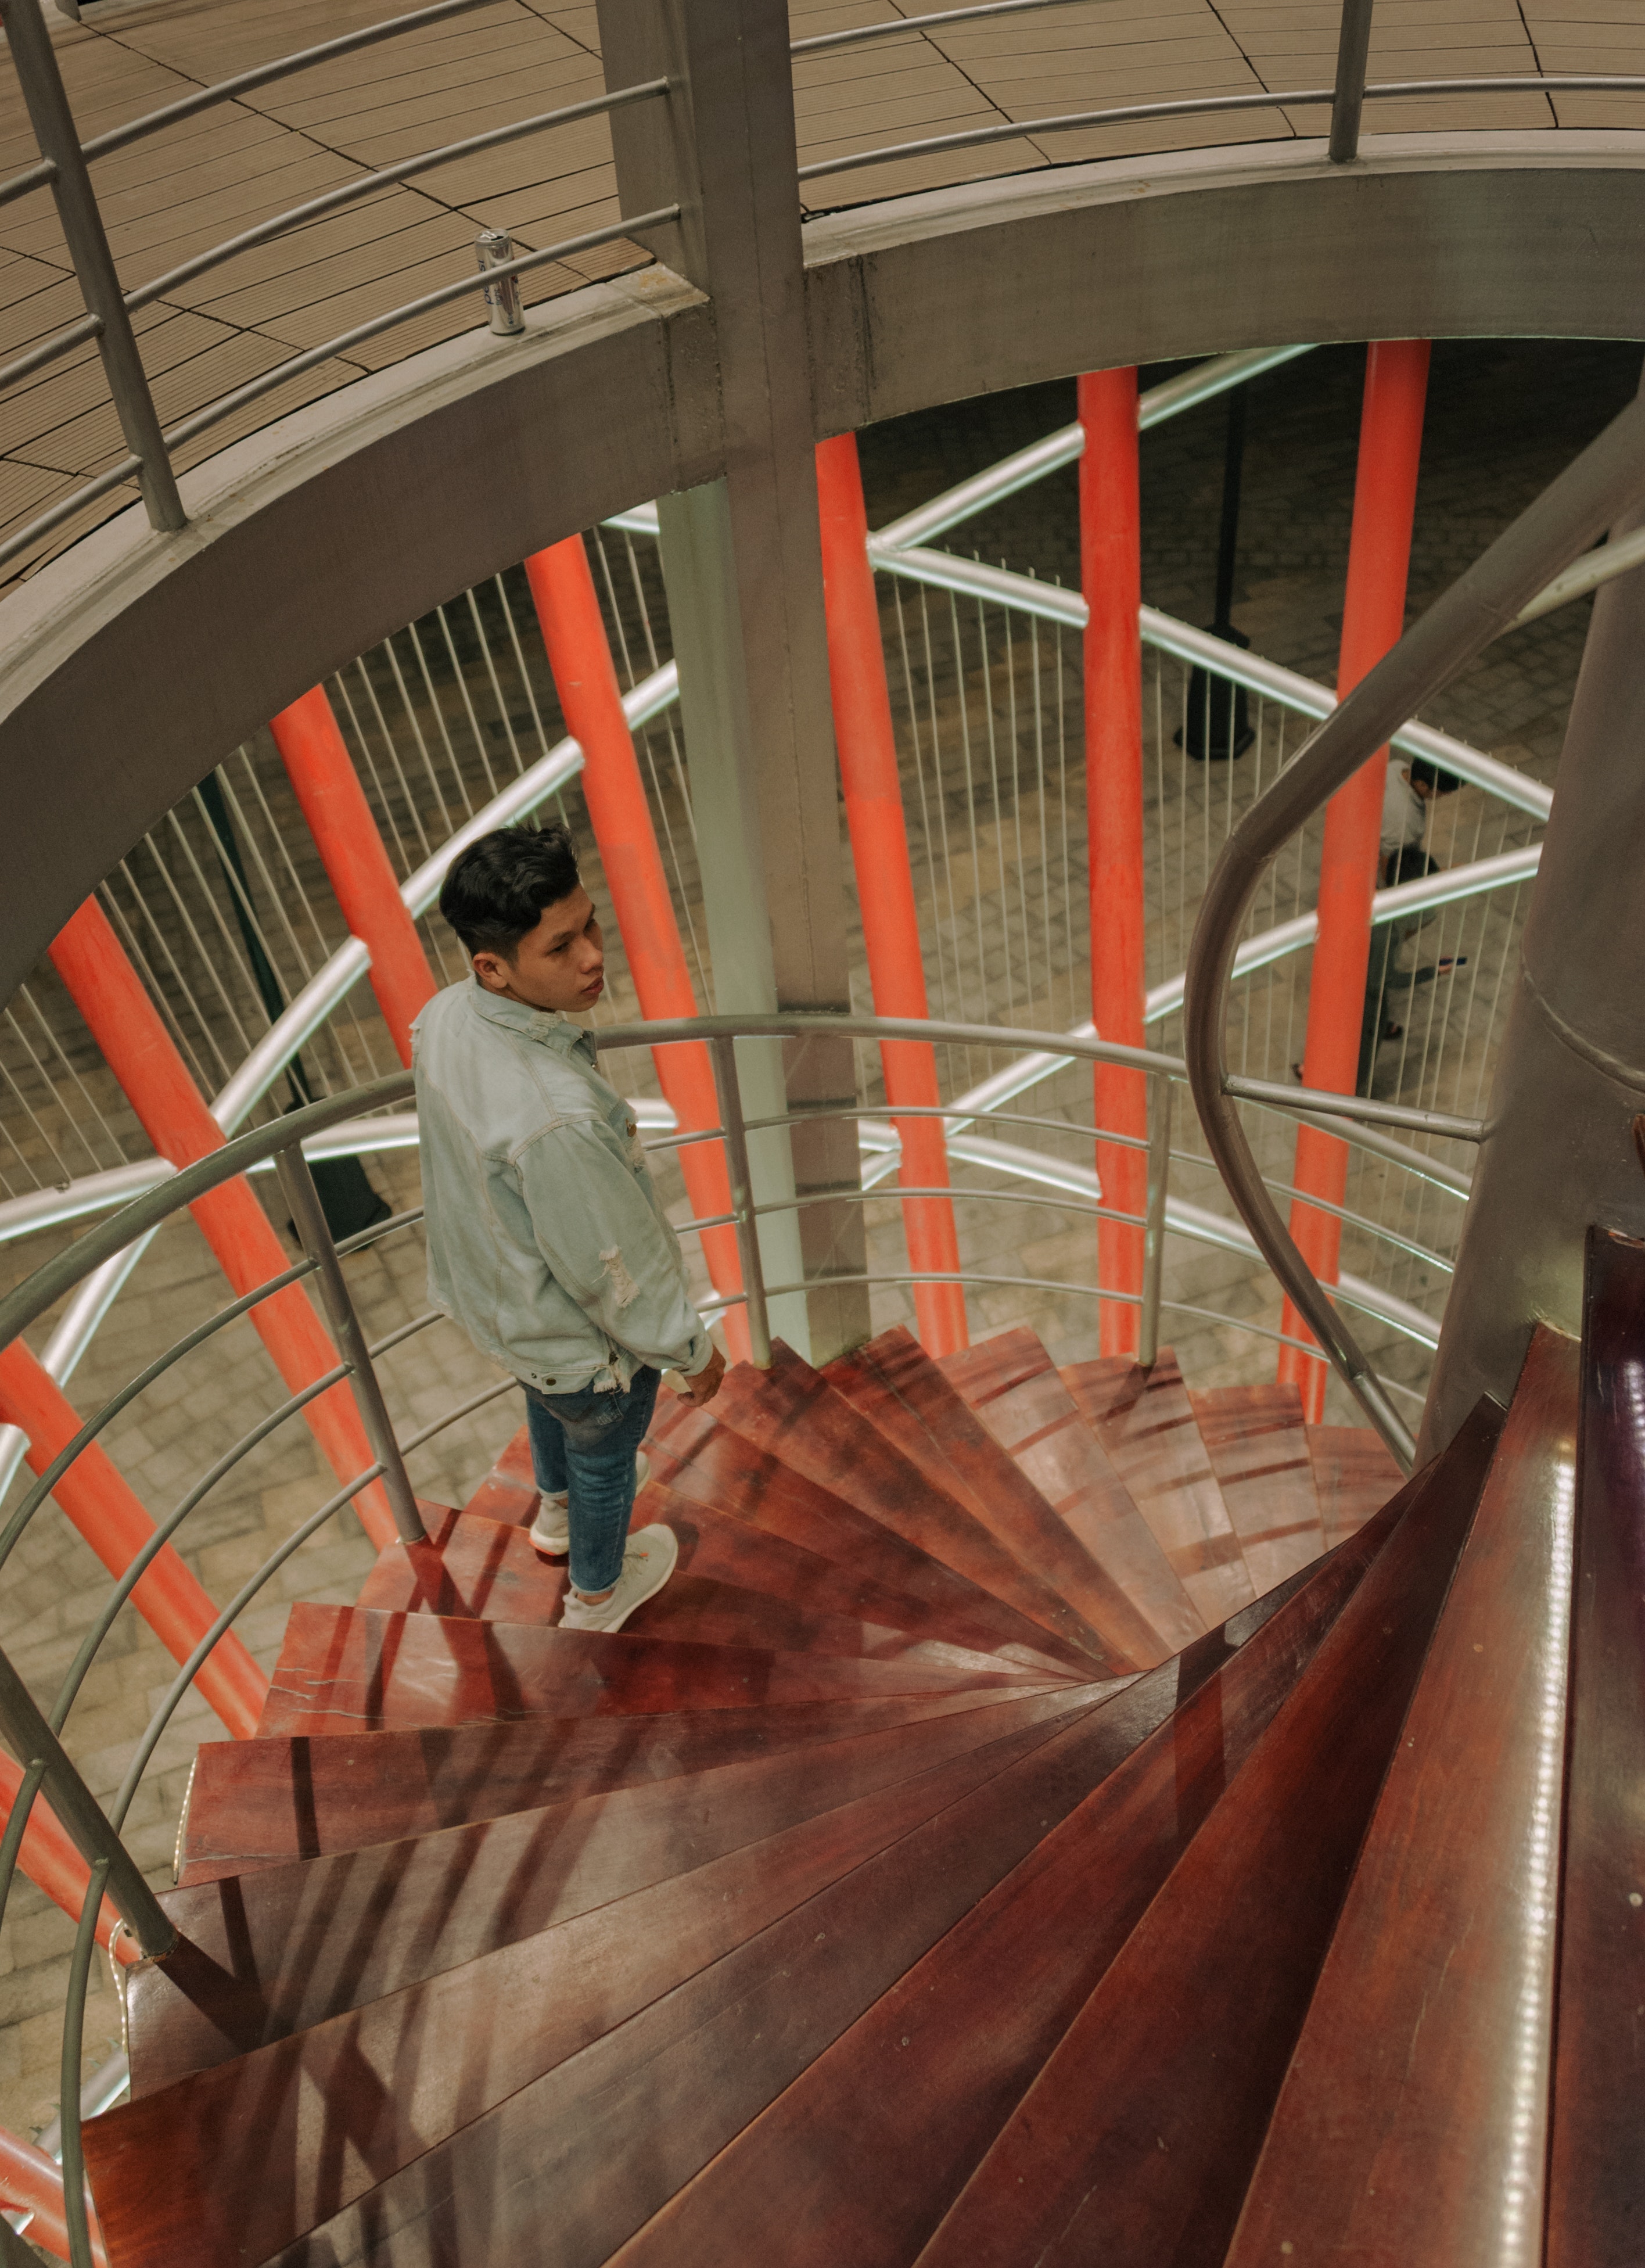 Man Wearing Gray Long-sleeved Top at the Staircase, Adult, Jeans, Wood, Steel, HQ Photo